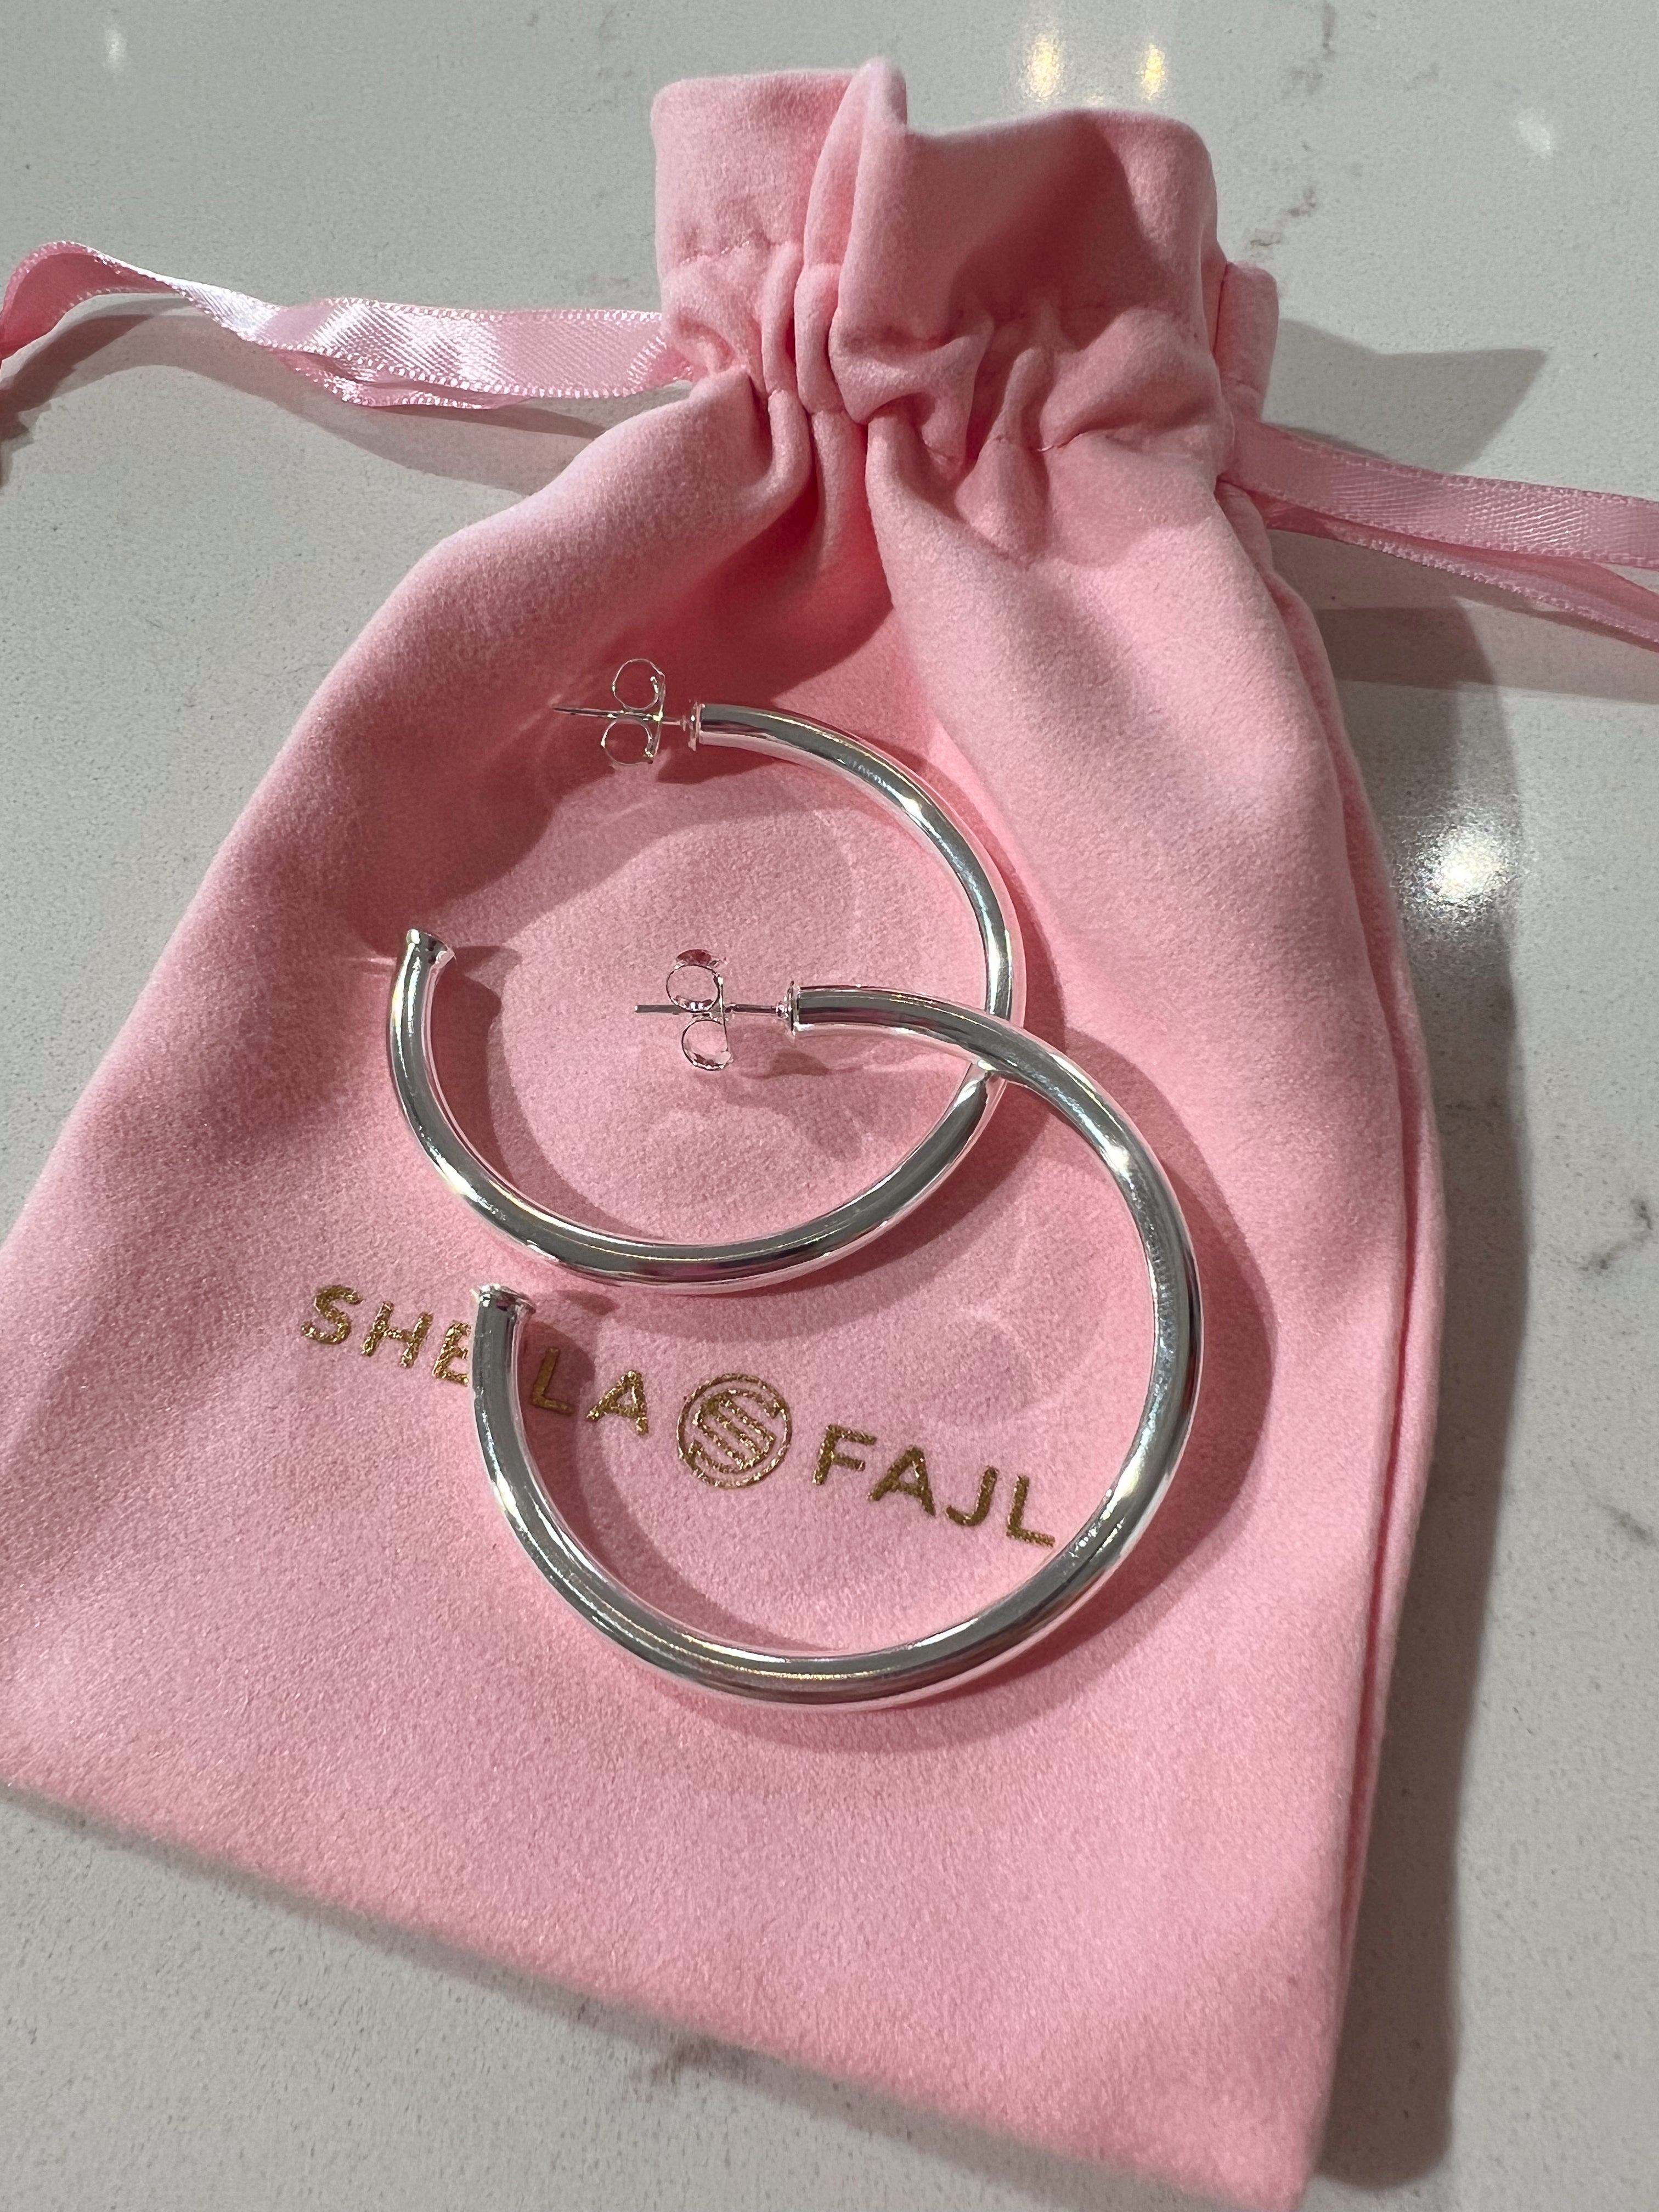 Small Silver Shiny Everybody's Favorite Hoops by Sheila Fajl